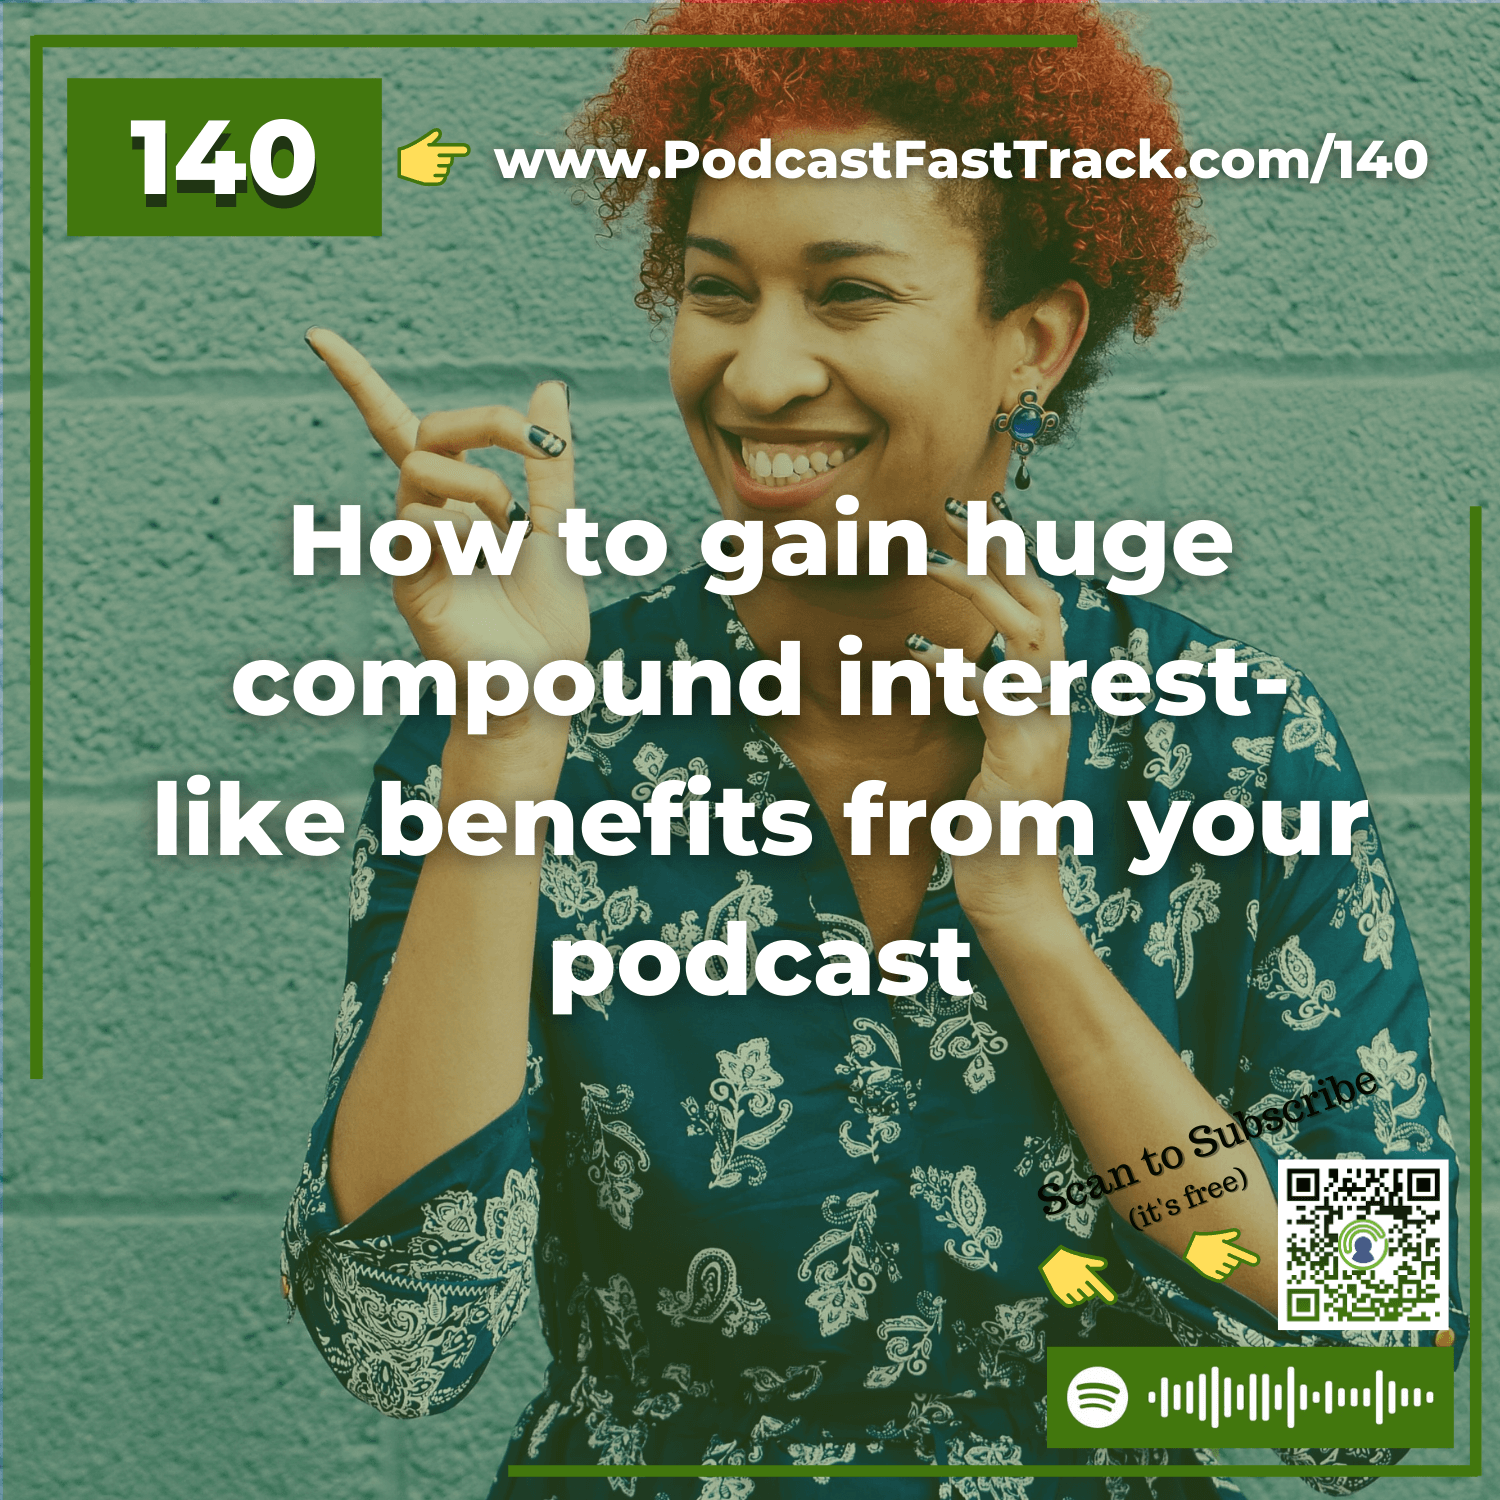 140: How to gain huge compound interest-like benefits from your podcast